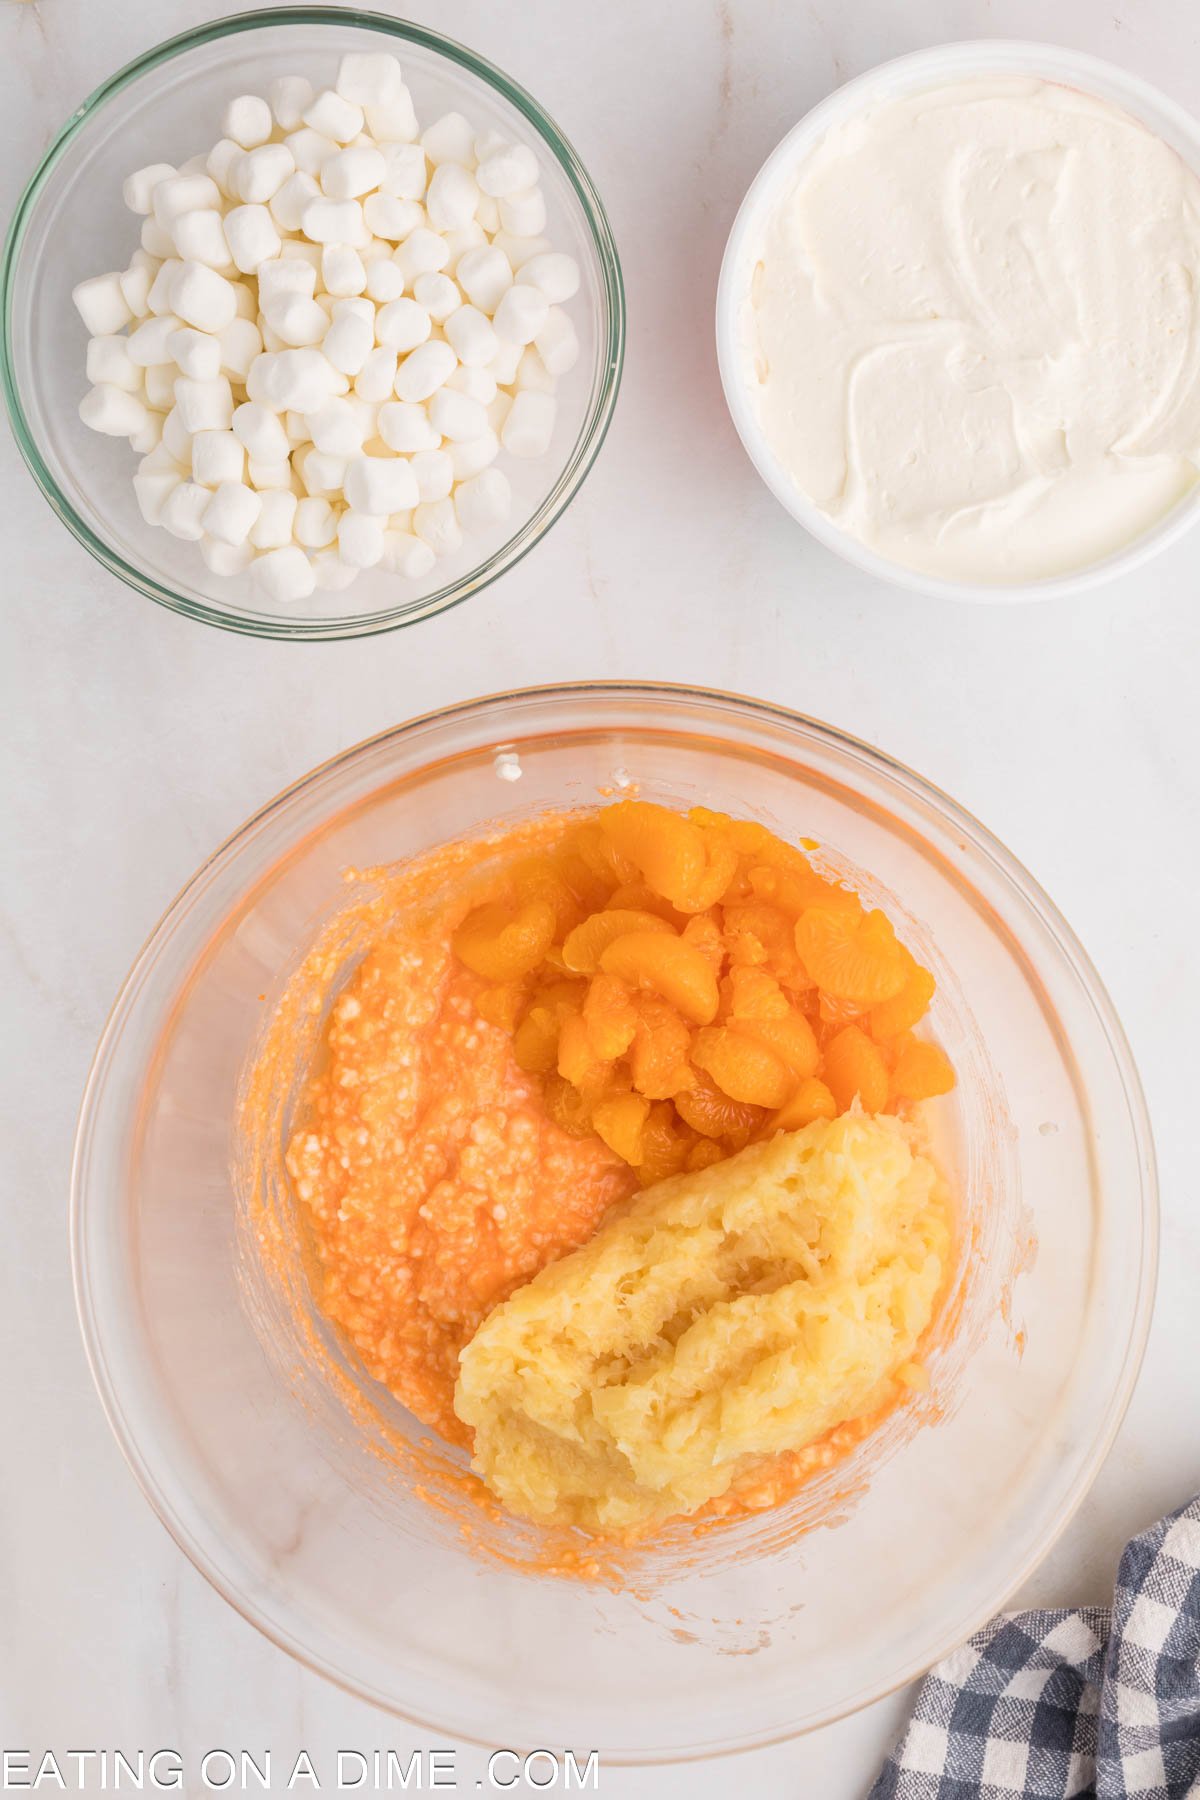 Adding the oranges and pineapple to the cottage cheese mixture